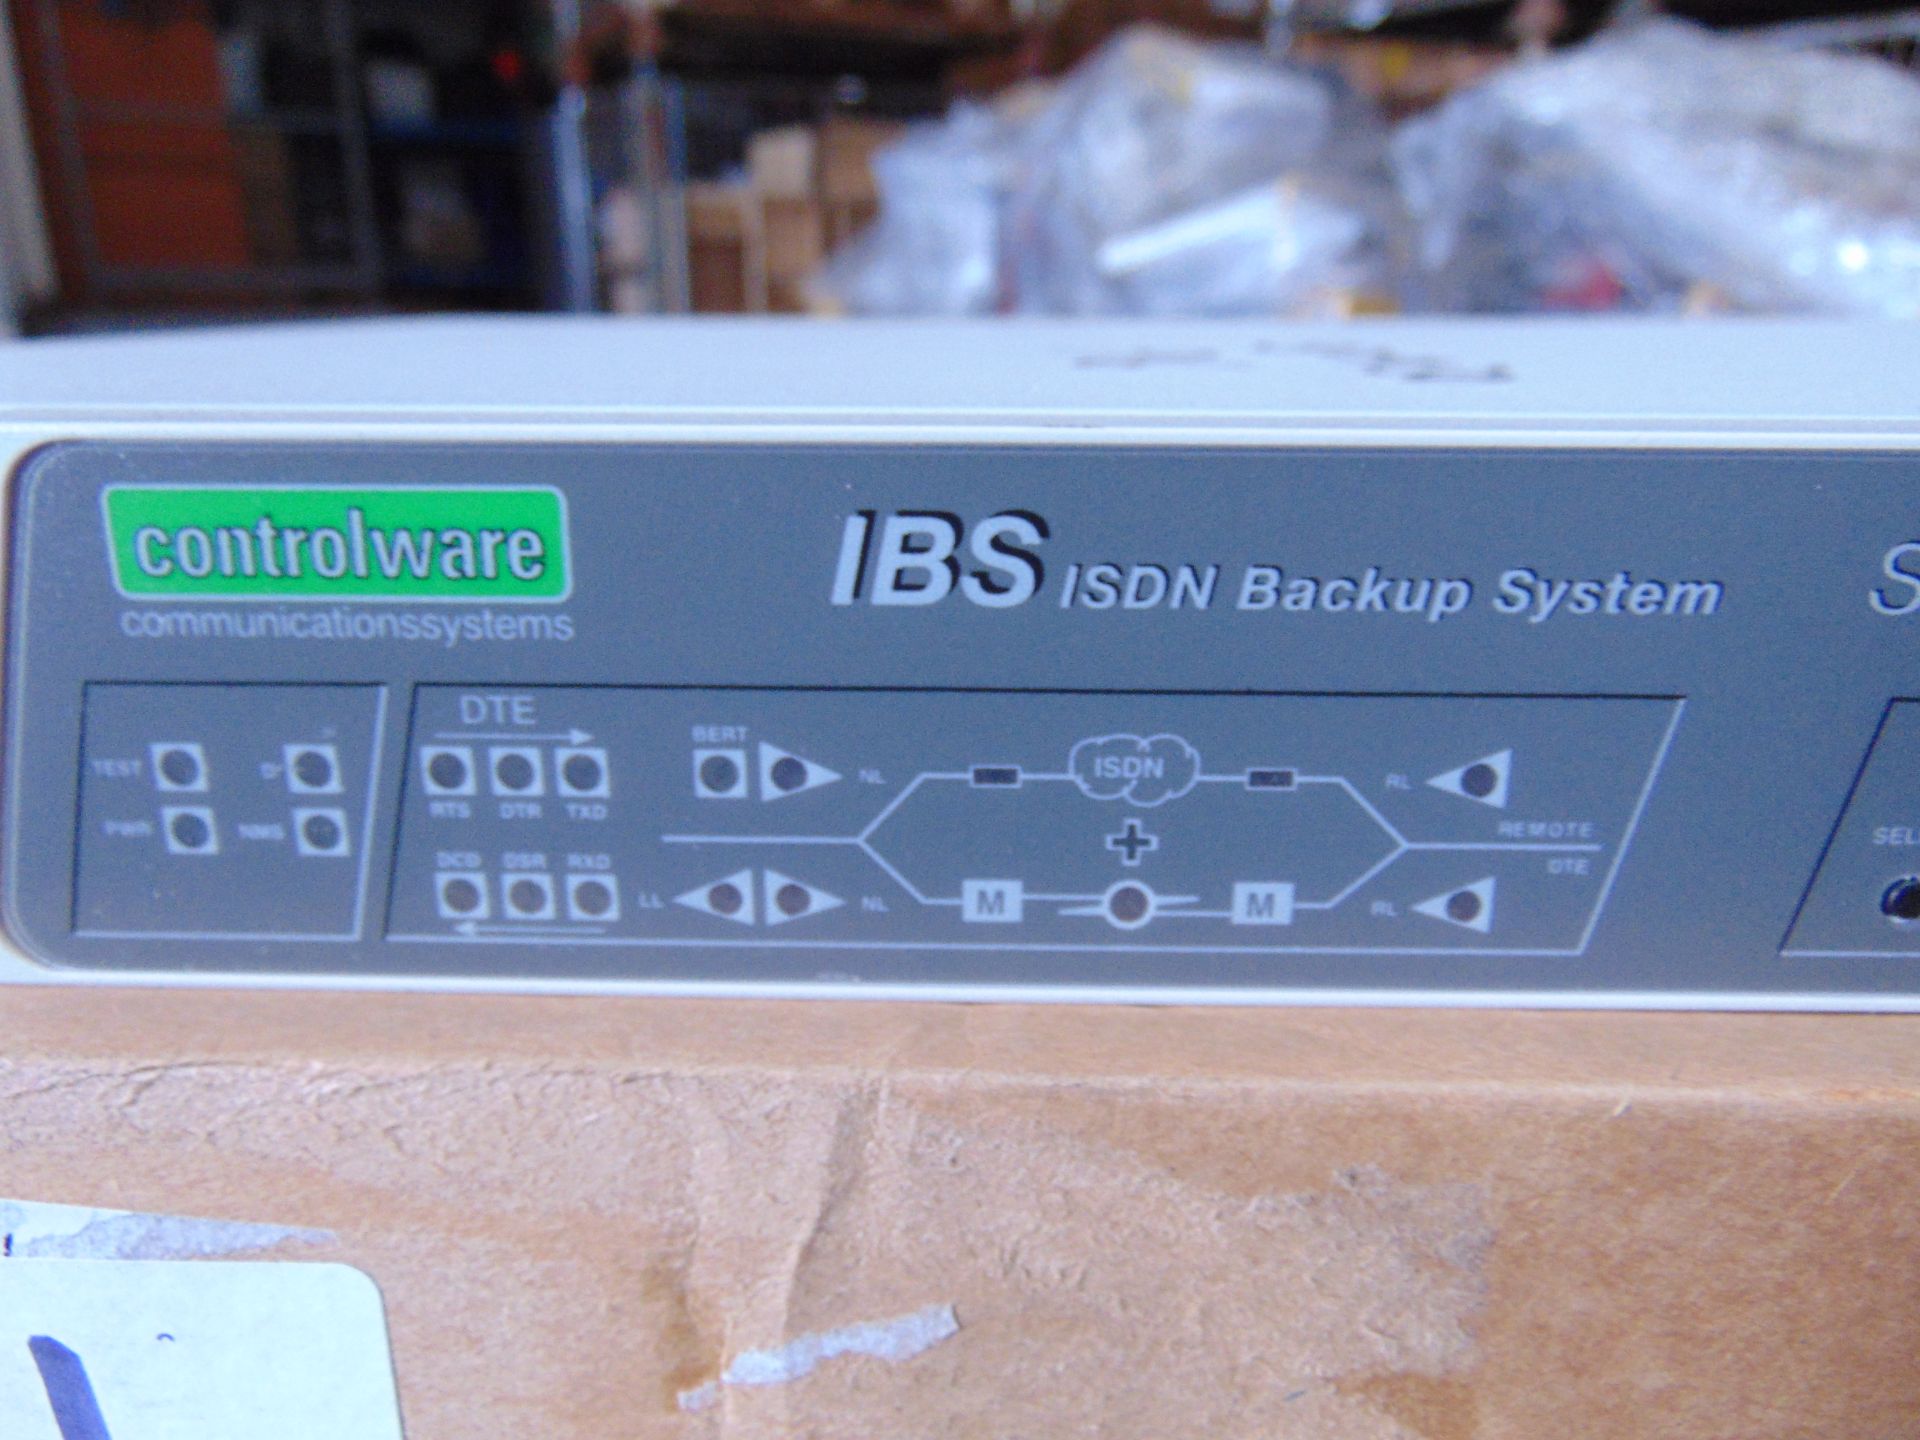 3 x Controlware IBS/ISDN Backup System Ports - Image 3 of 7